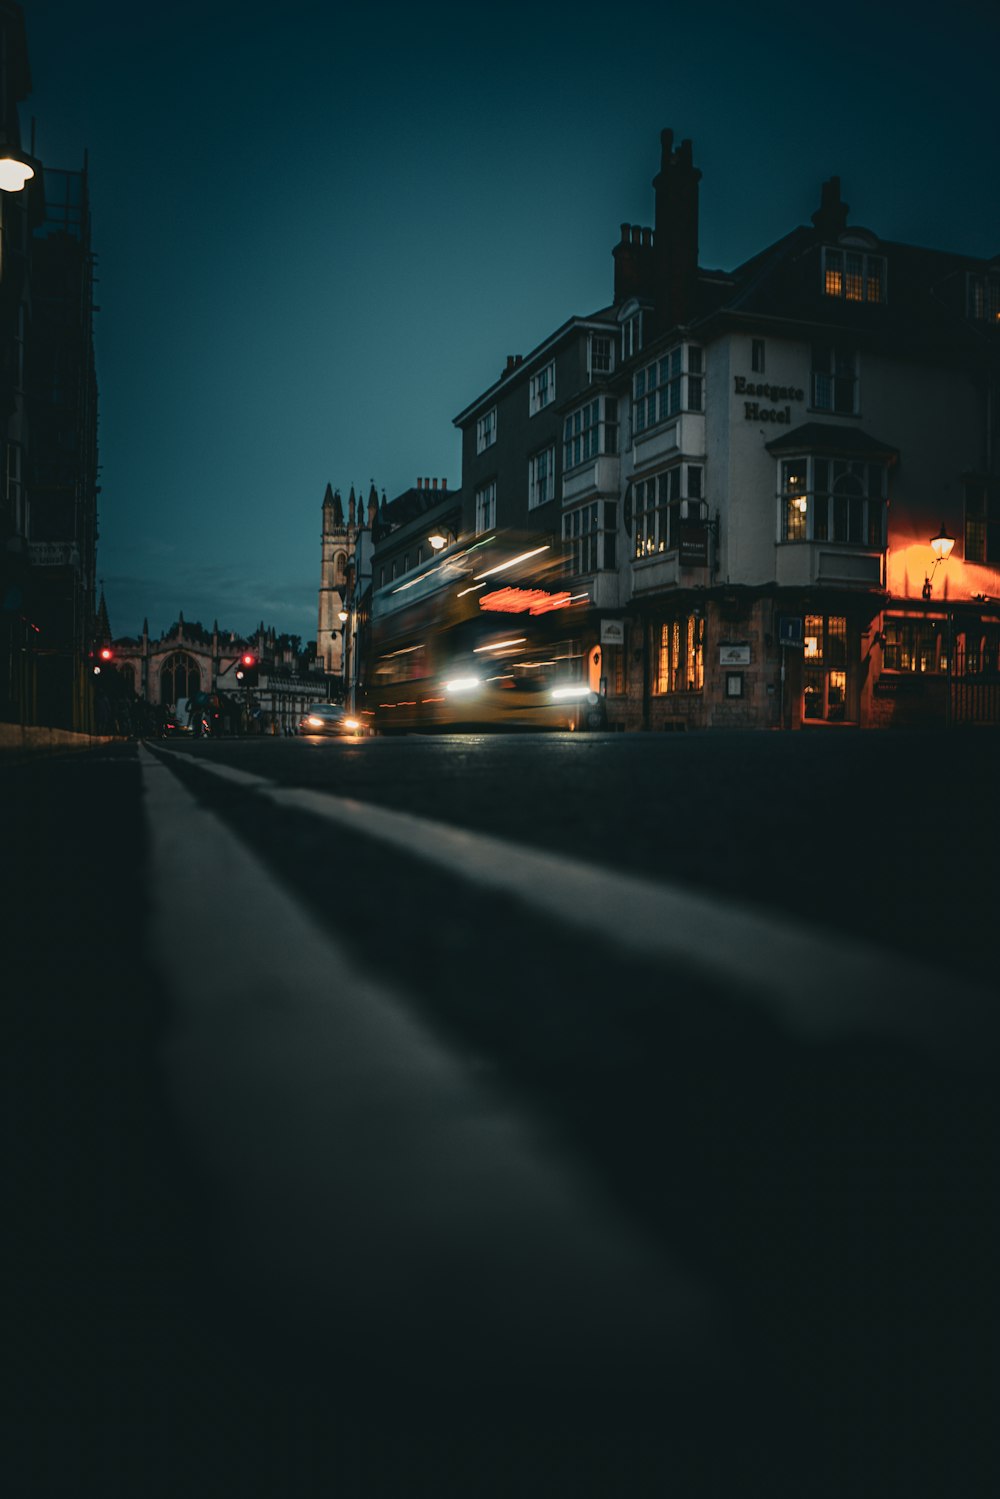 a city street at night with a double decker bus passing by